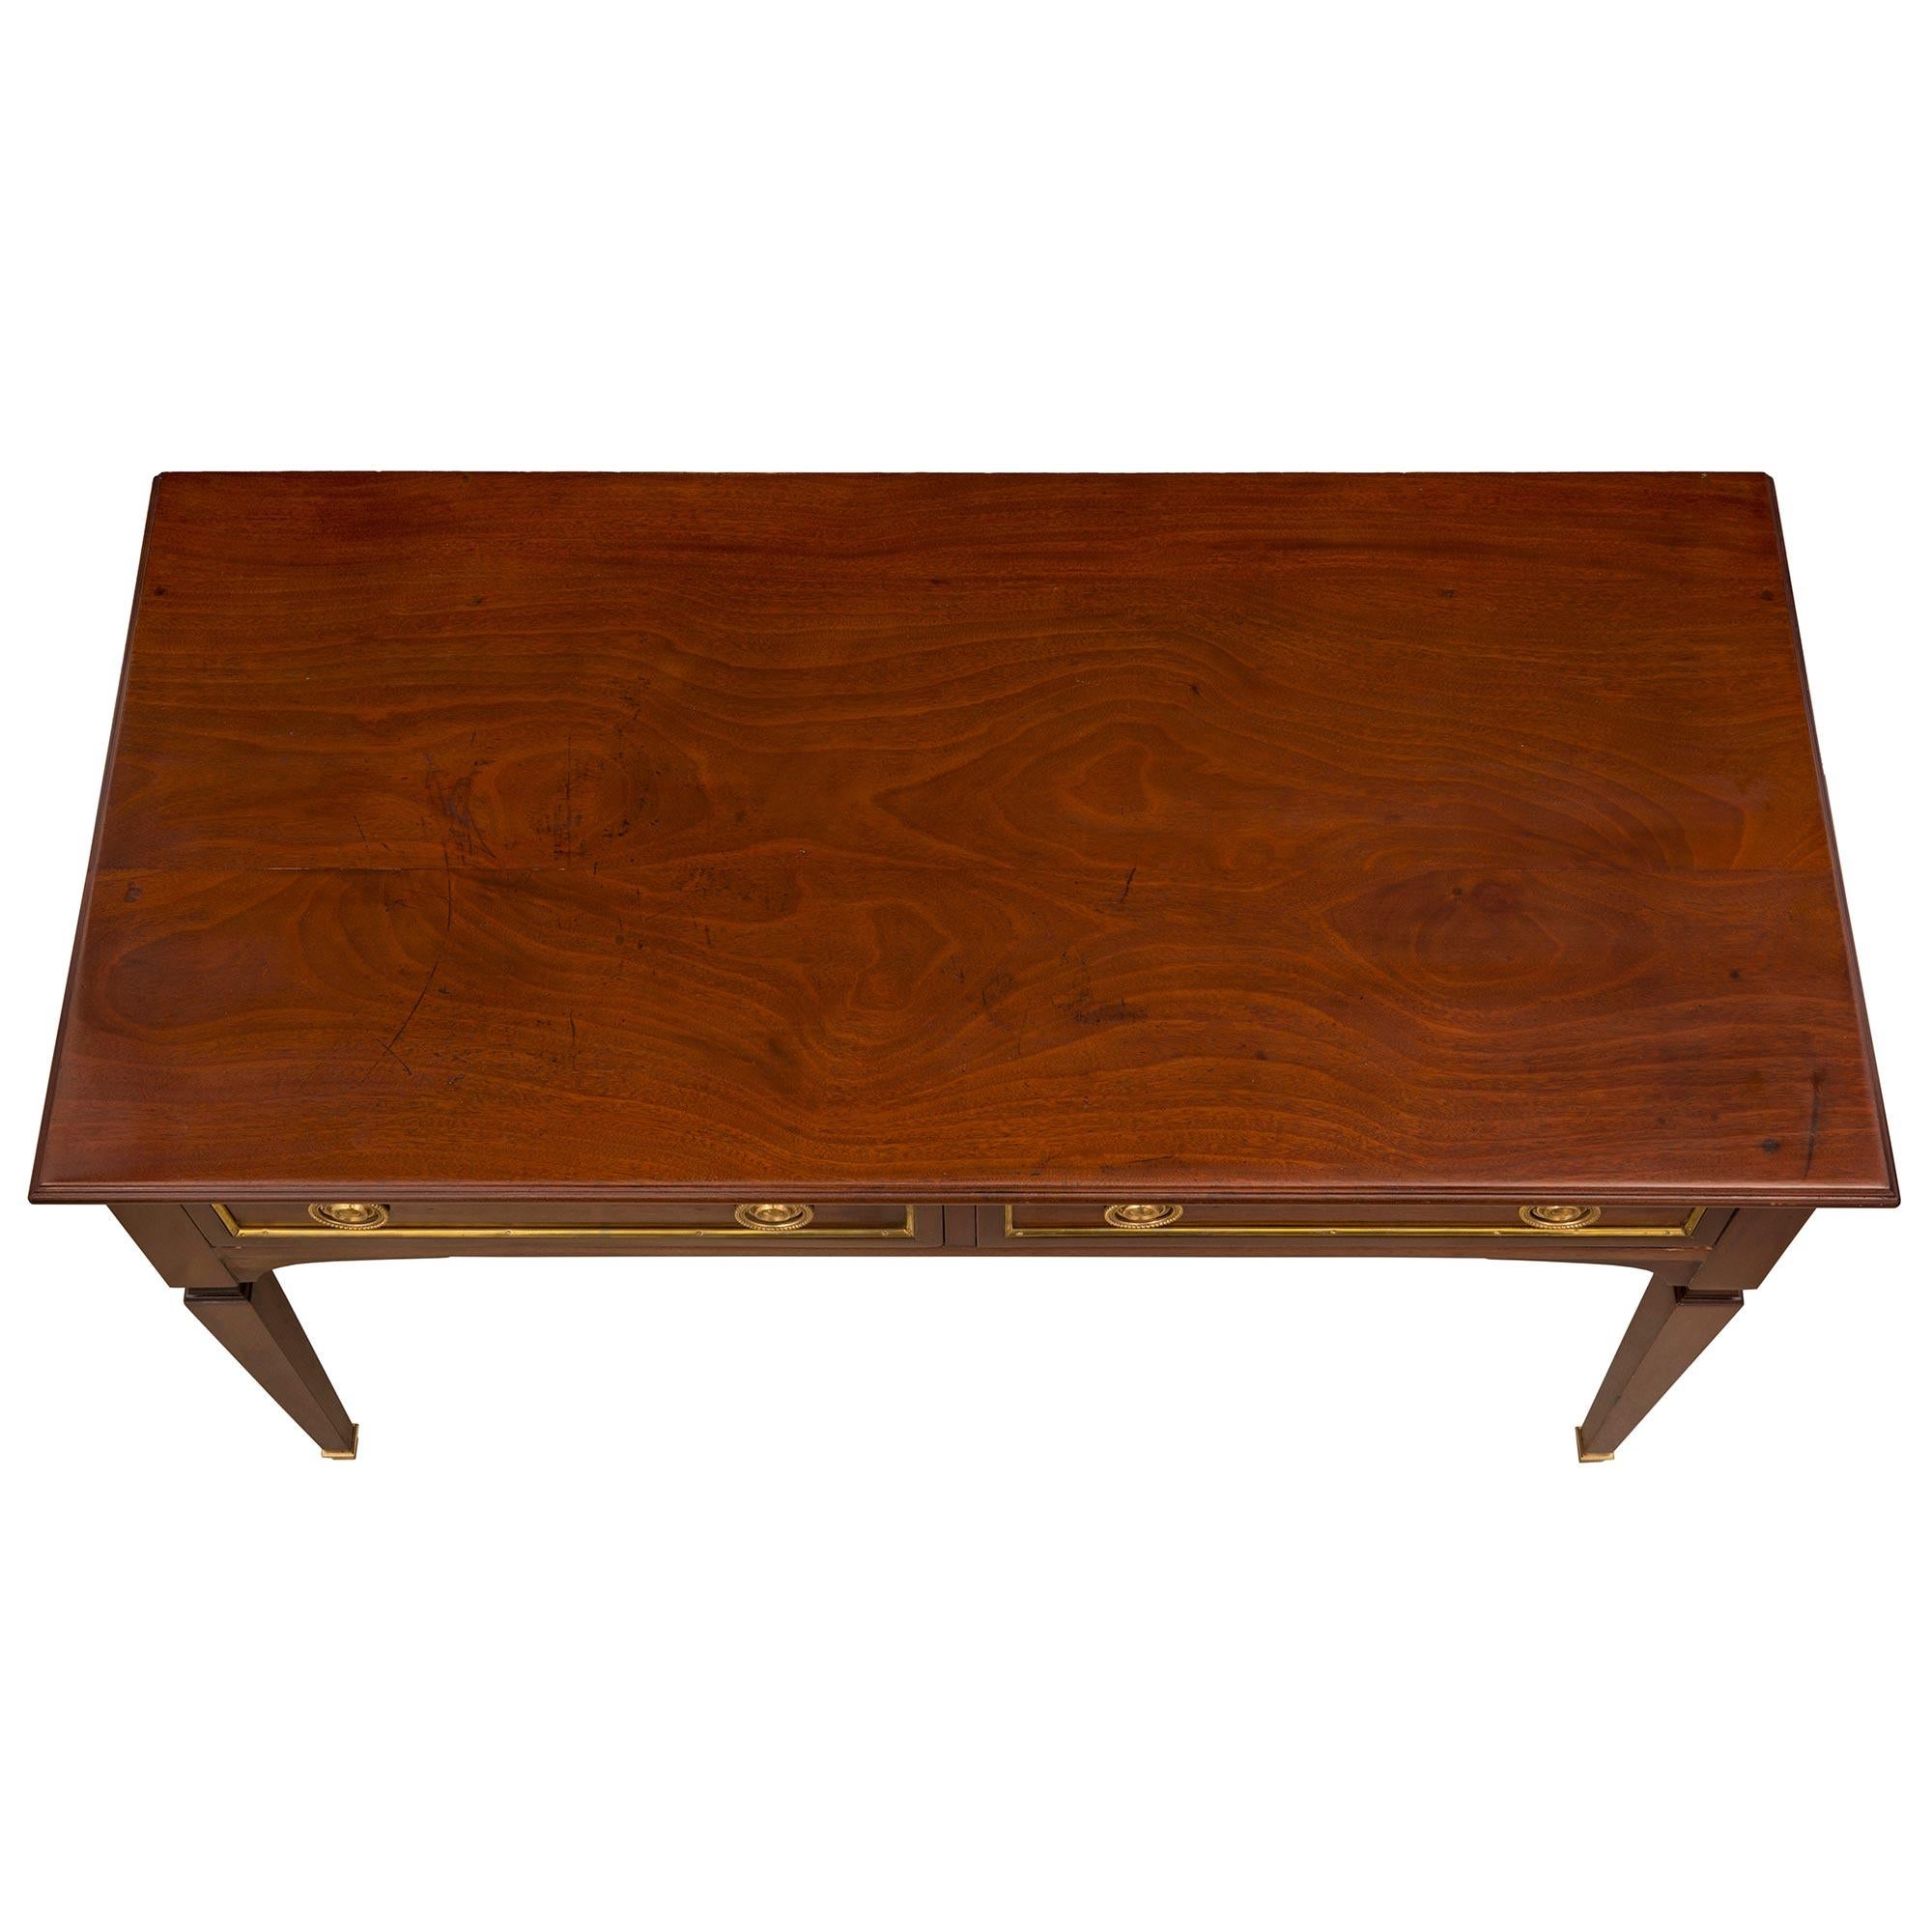 An elegant French 19th century Louis XVI st. Mahogany, brass, and ormolu desk. The desk is raised by fine square tapered legs with elegant mottled fitted ormolu sabots. The straight frieze displays two drawers, each decorated with recessed panels